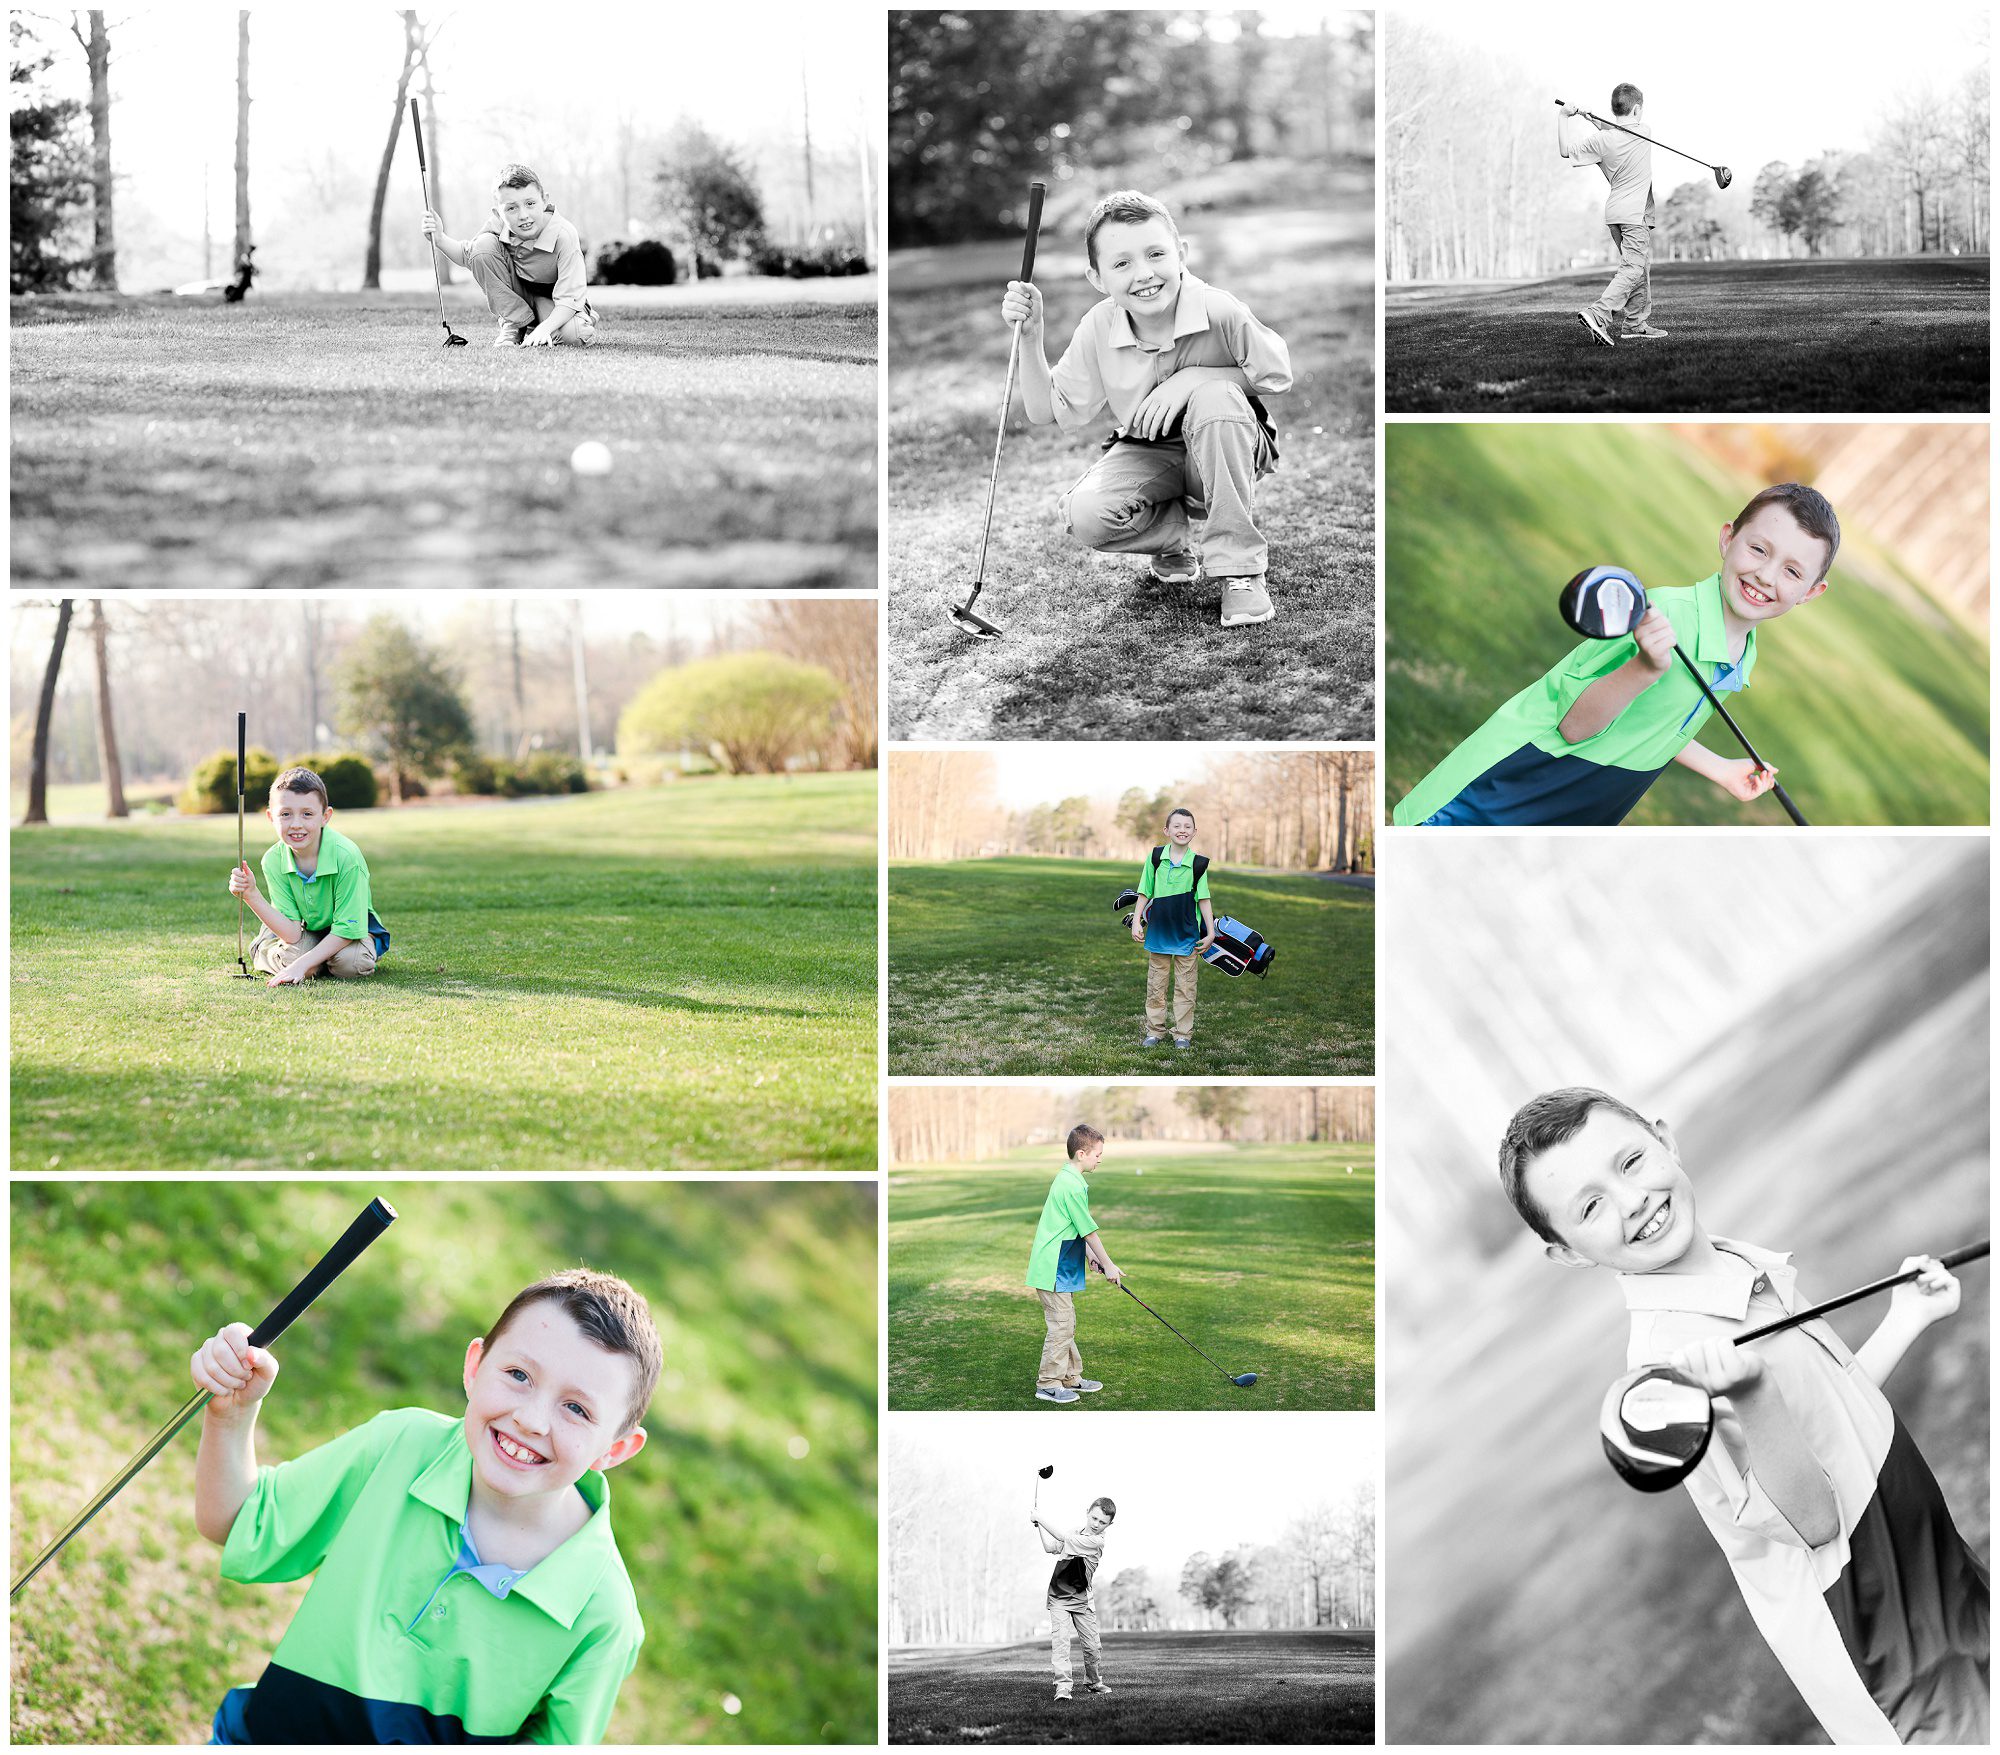 fluvanna father son spring pictures portrait photographer lake monticello golf course links clubs fatherhood childhood relationship parenthood charlottesville